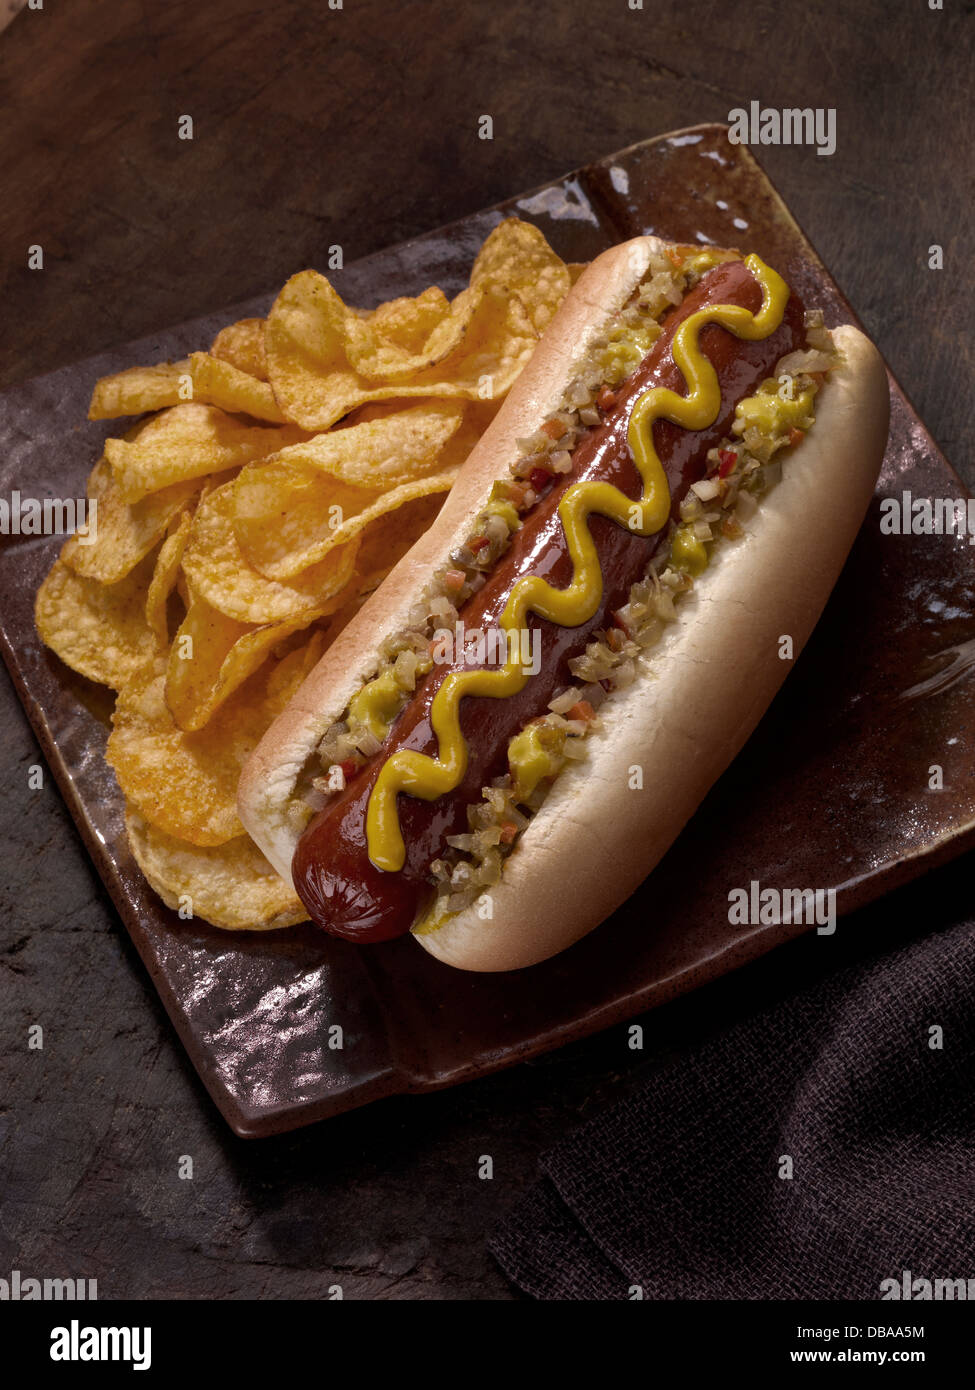 Chicago style hot dog with chips. Stock Photo